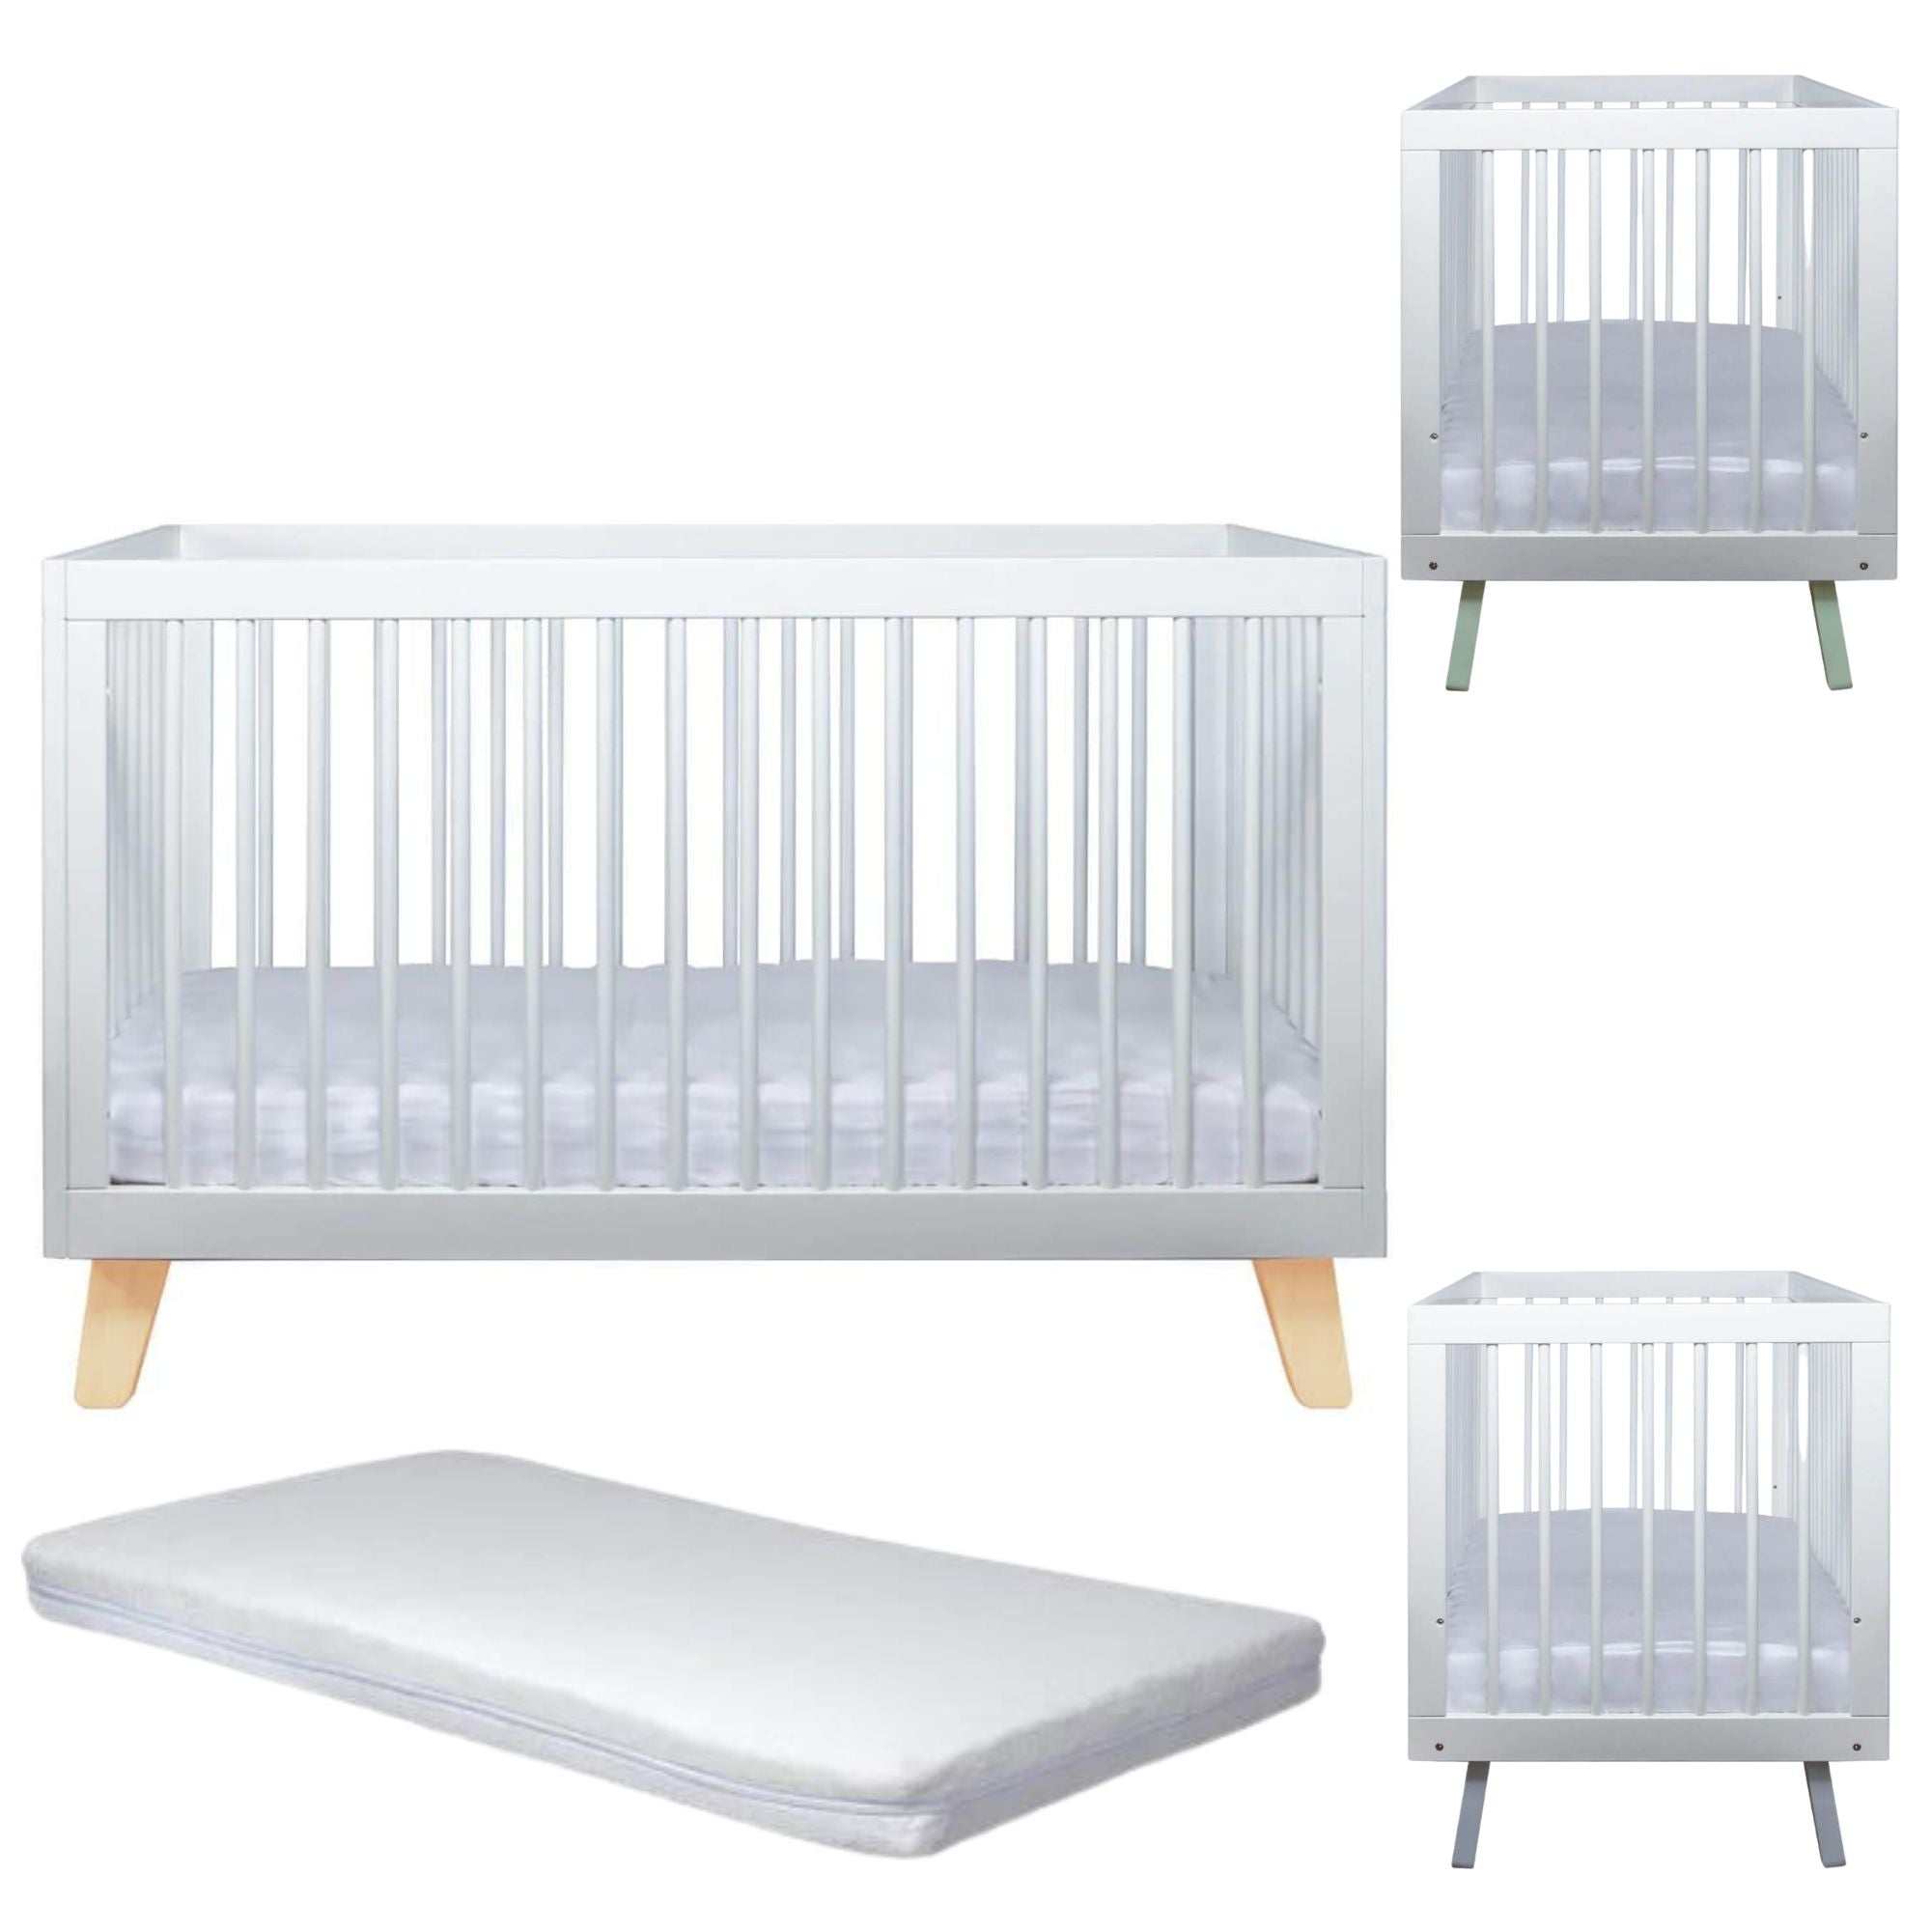 Grotime Lincoln Cot and Mattress Package with 3 Interchangerble Feet